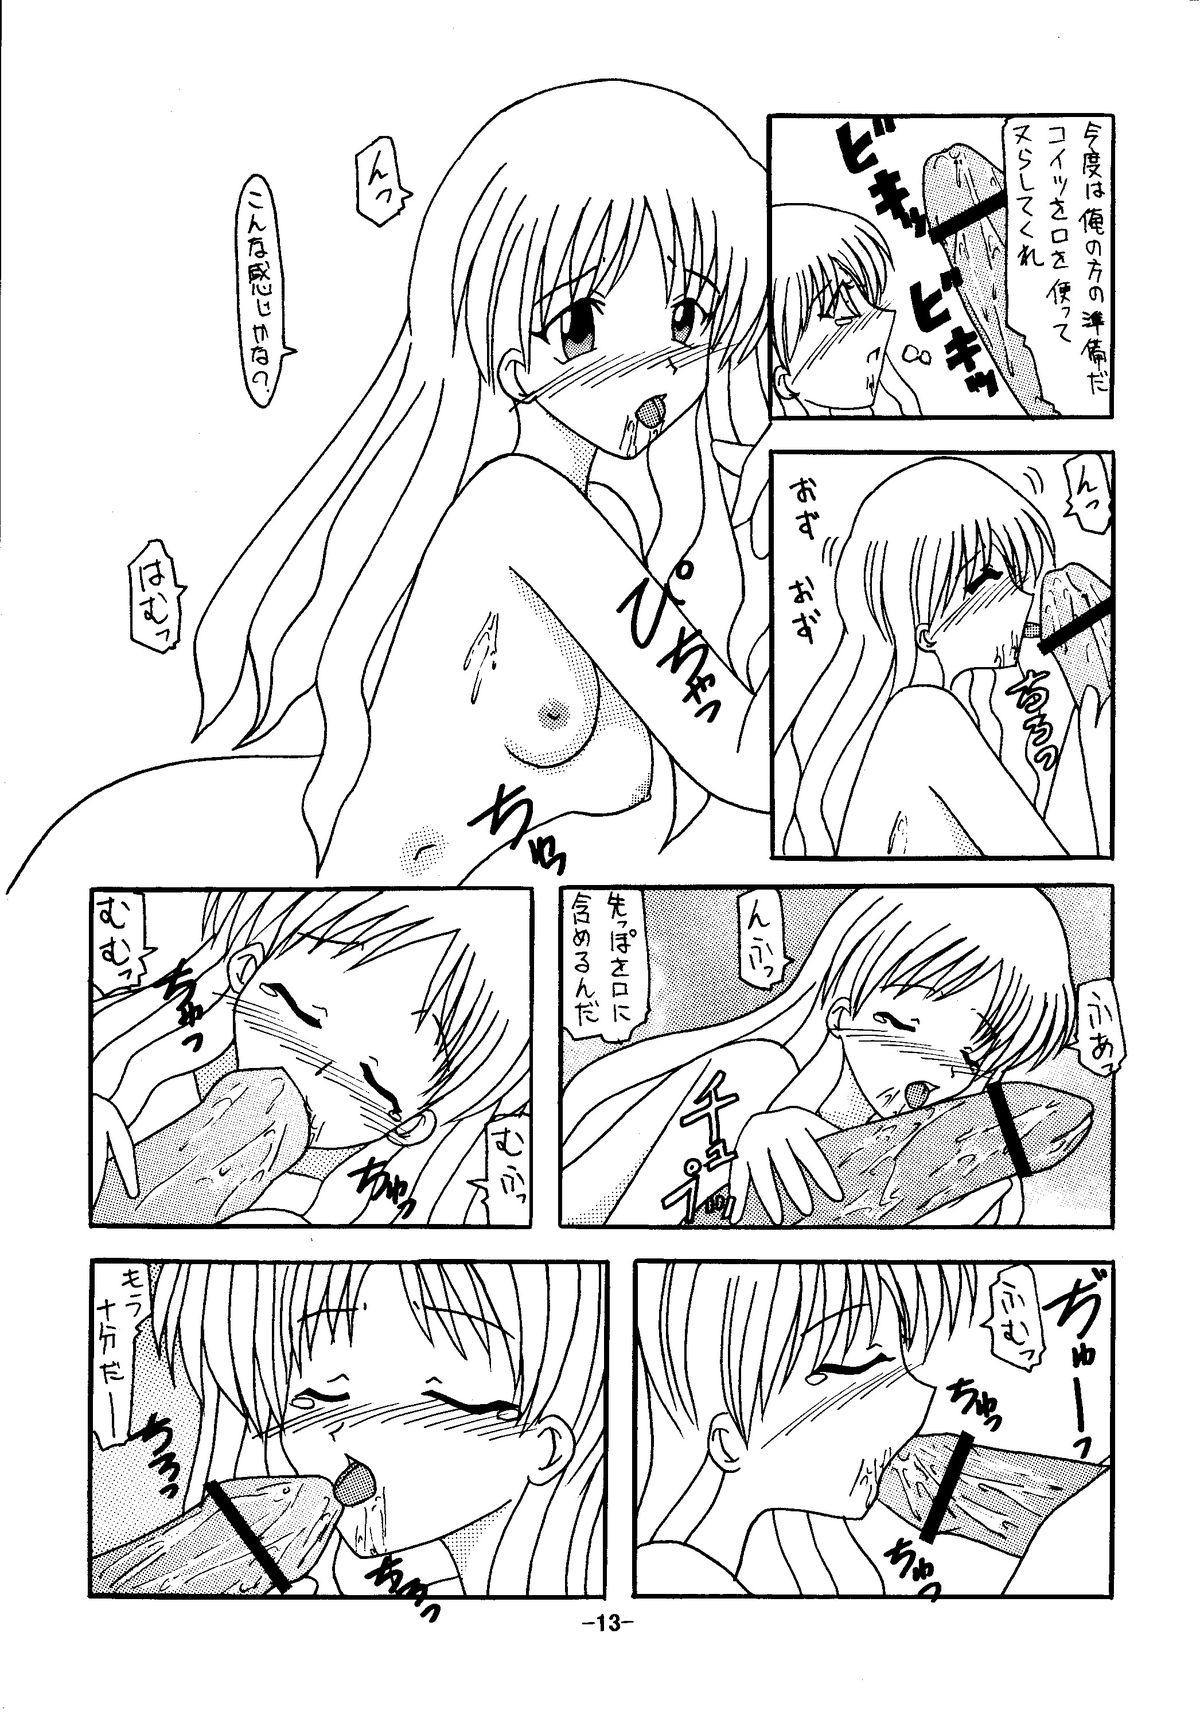 Body Massage little witch project - Harry potter Anime - Page 12